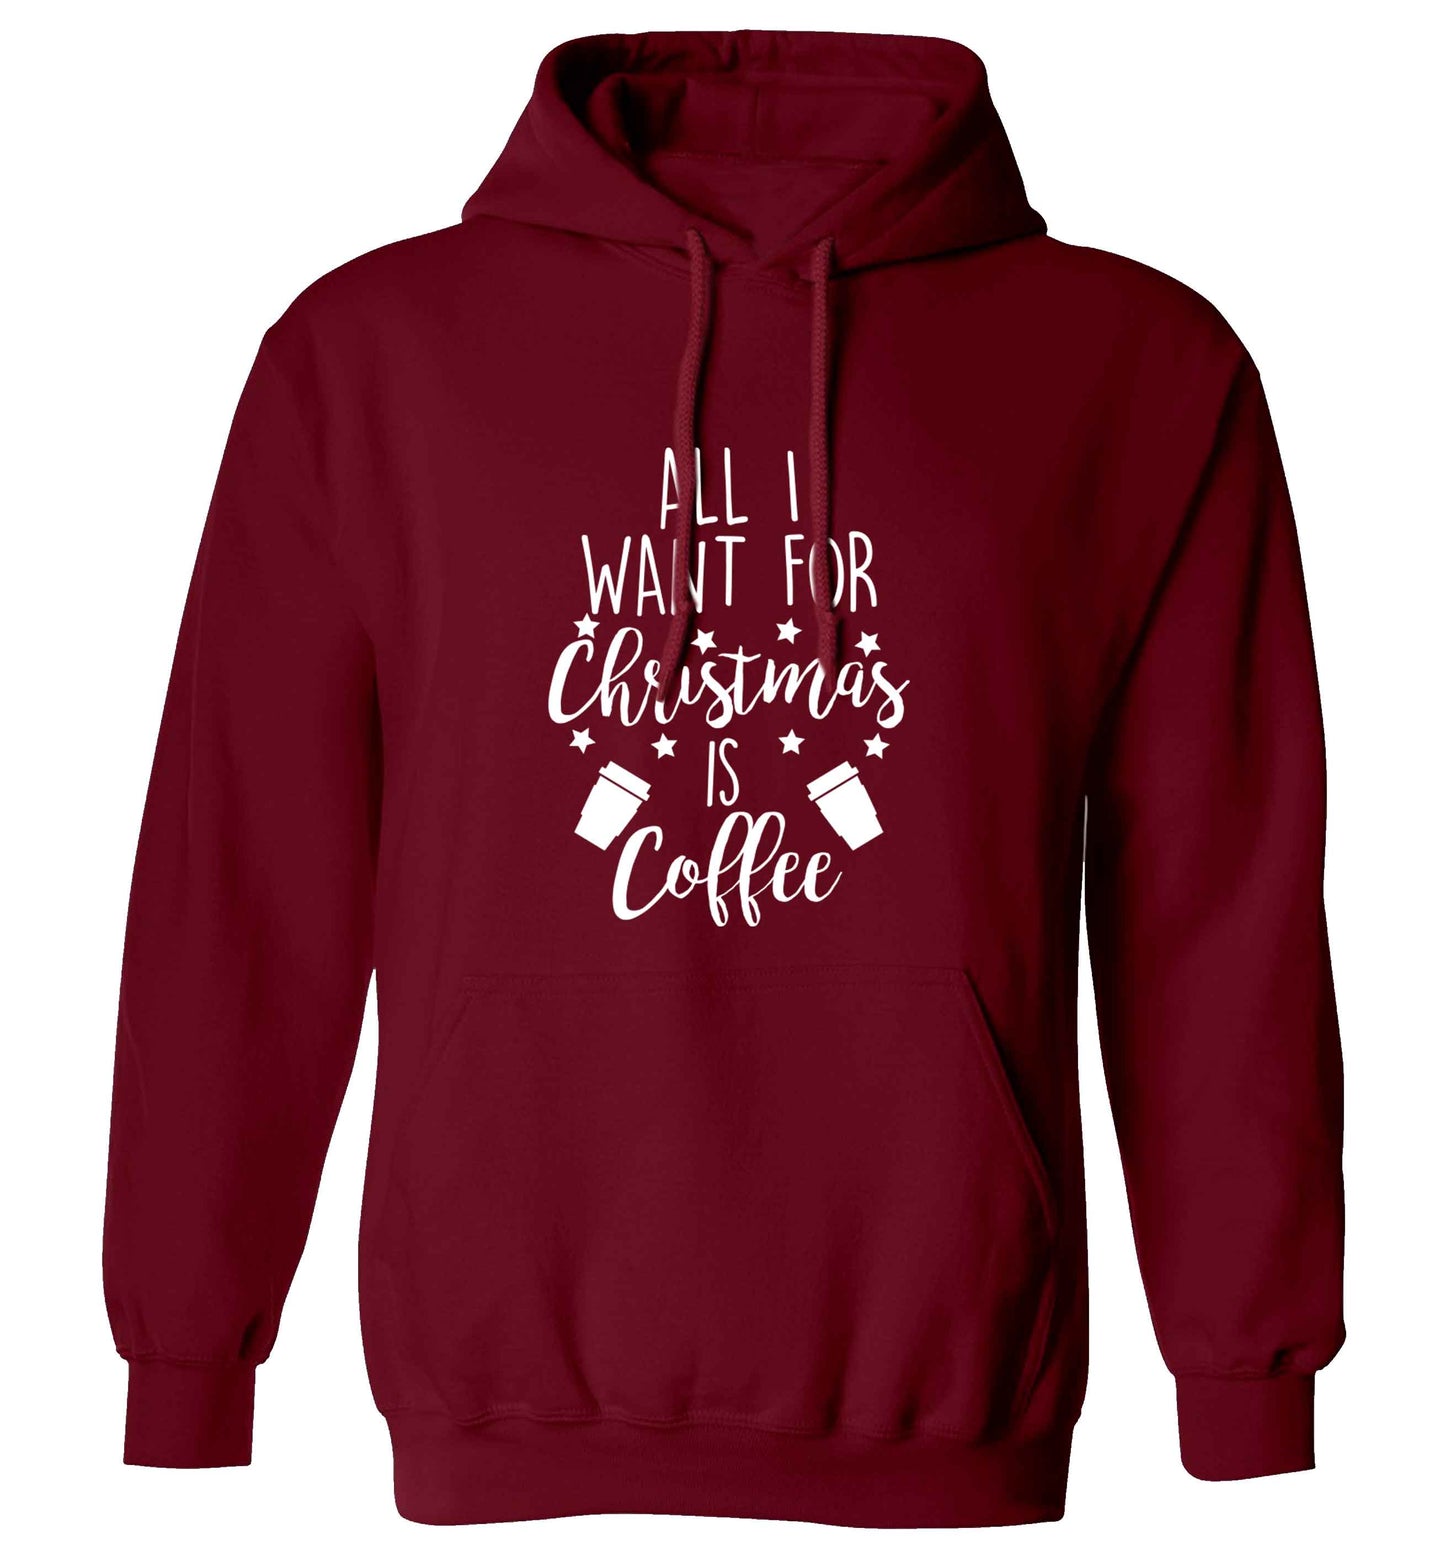 All I want for Christmas is coffee adults unisex maroon hoodie 2XL